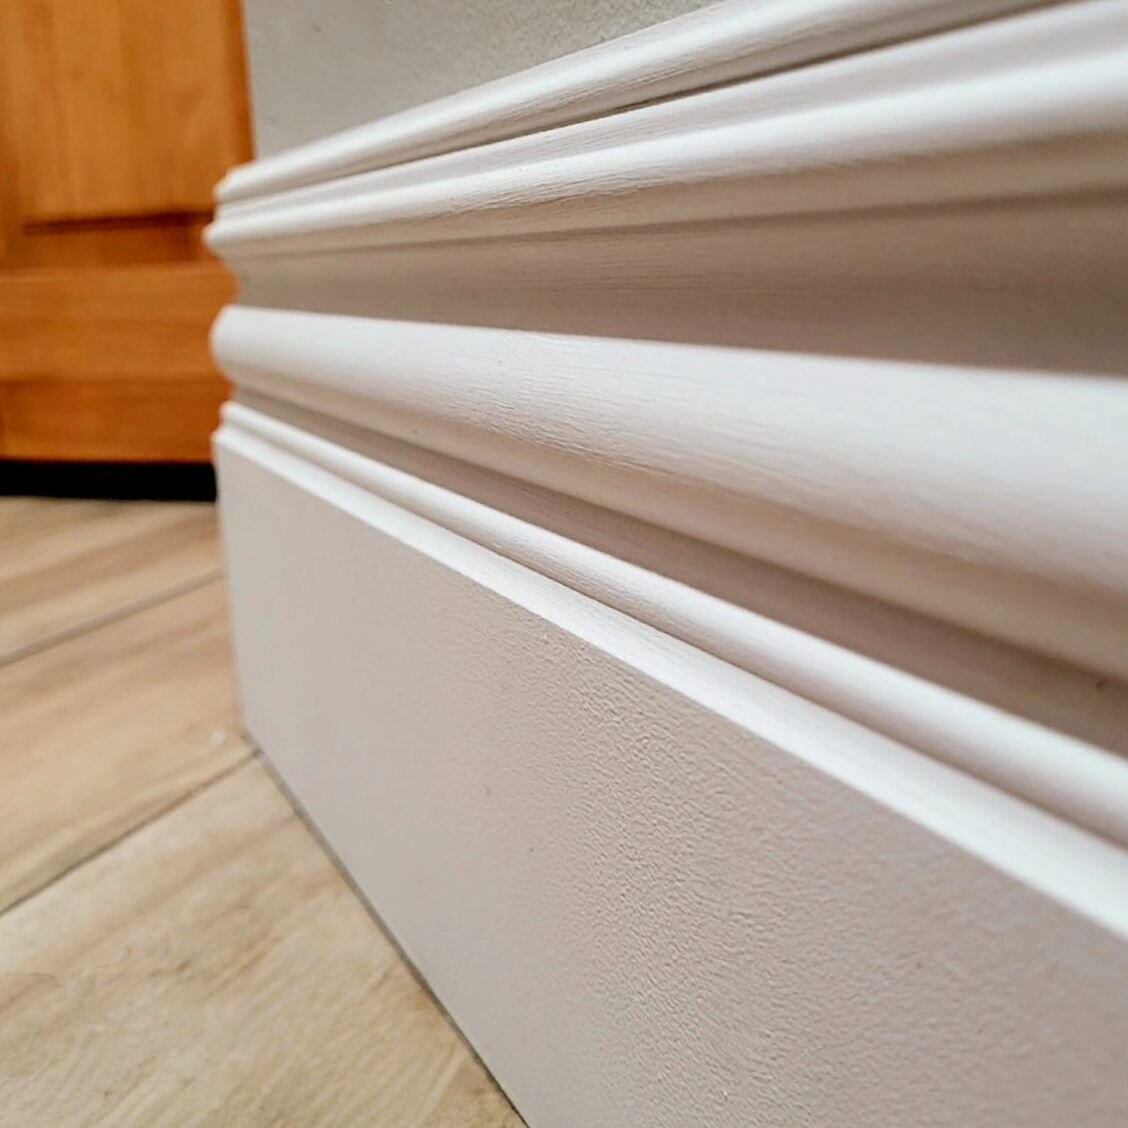 Baseboards are in! The murdroom is starting to come together. 

This is a poplar baseboard. There used to be MDF in this mudroom, but of course, MDF doesn't like water, especially standing water from the dog bowl and lots of wet boots.  We opted to s